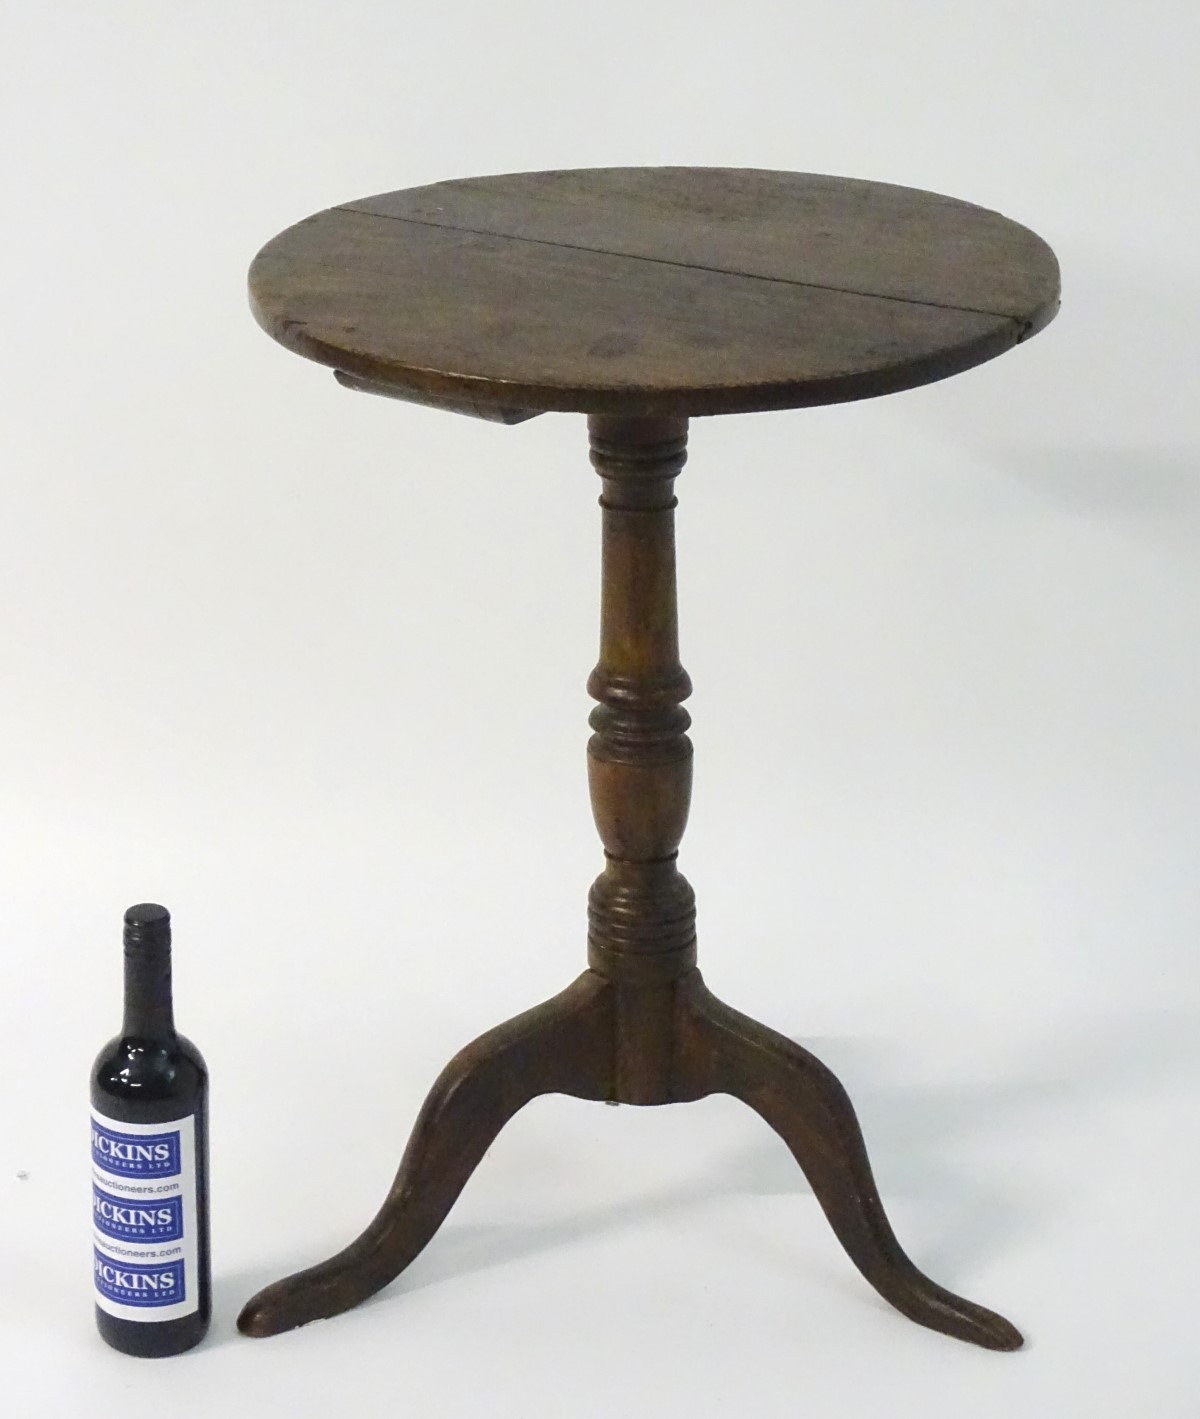 A late 18thC oak tripod table with a circular table top above a turned stem and standing on three